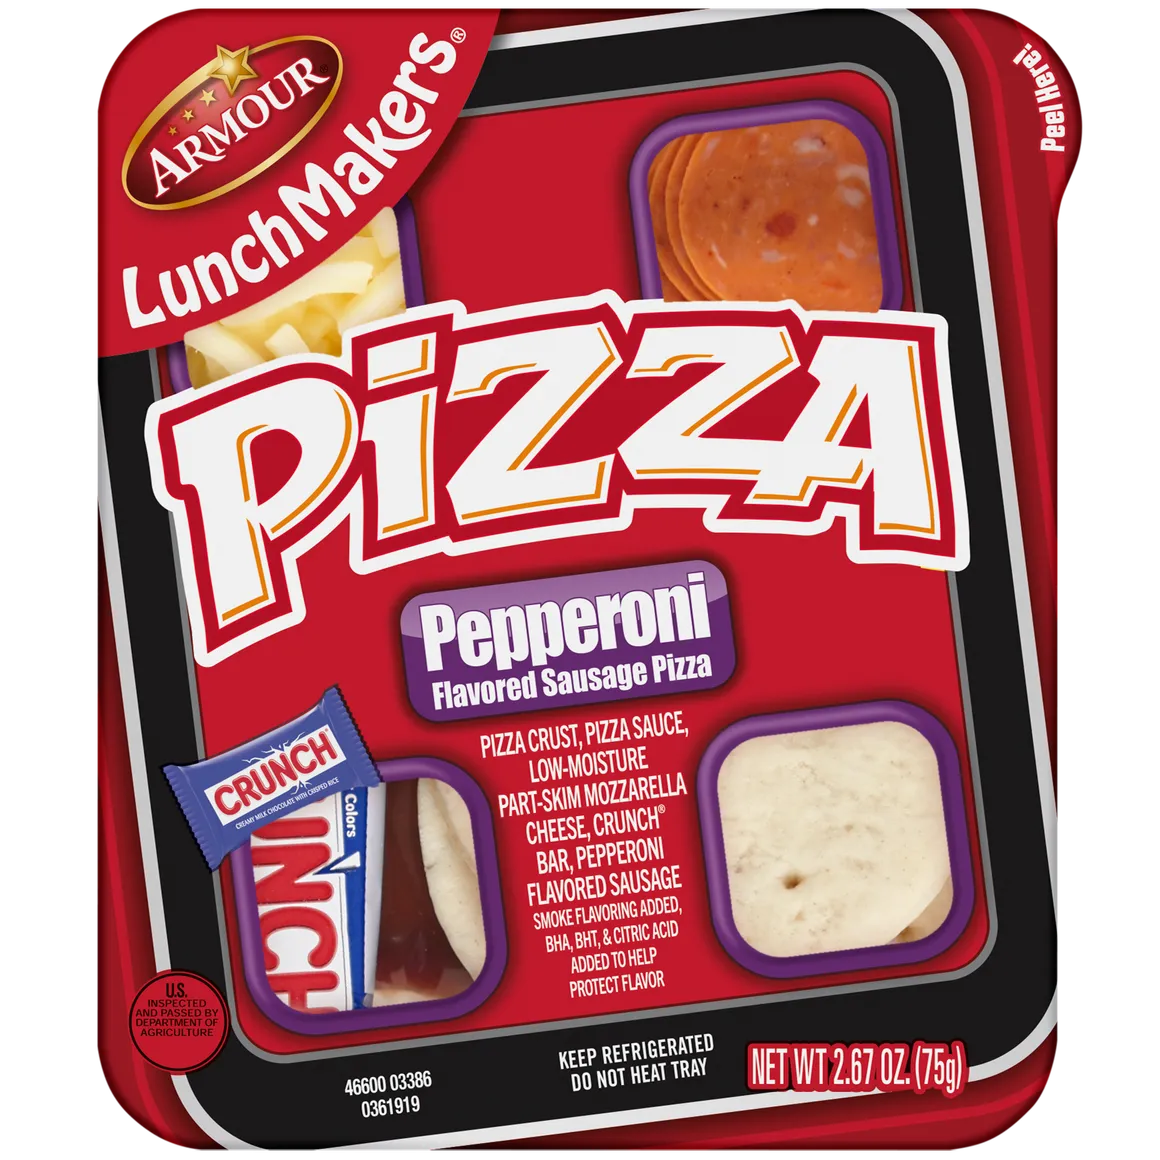 Armour LunchMakers Pepperoni Pizza